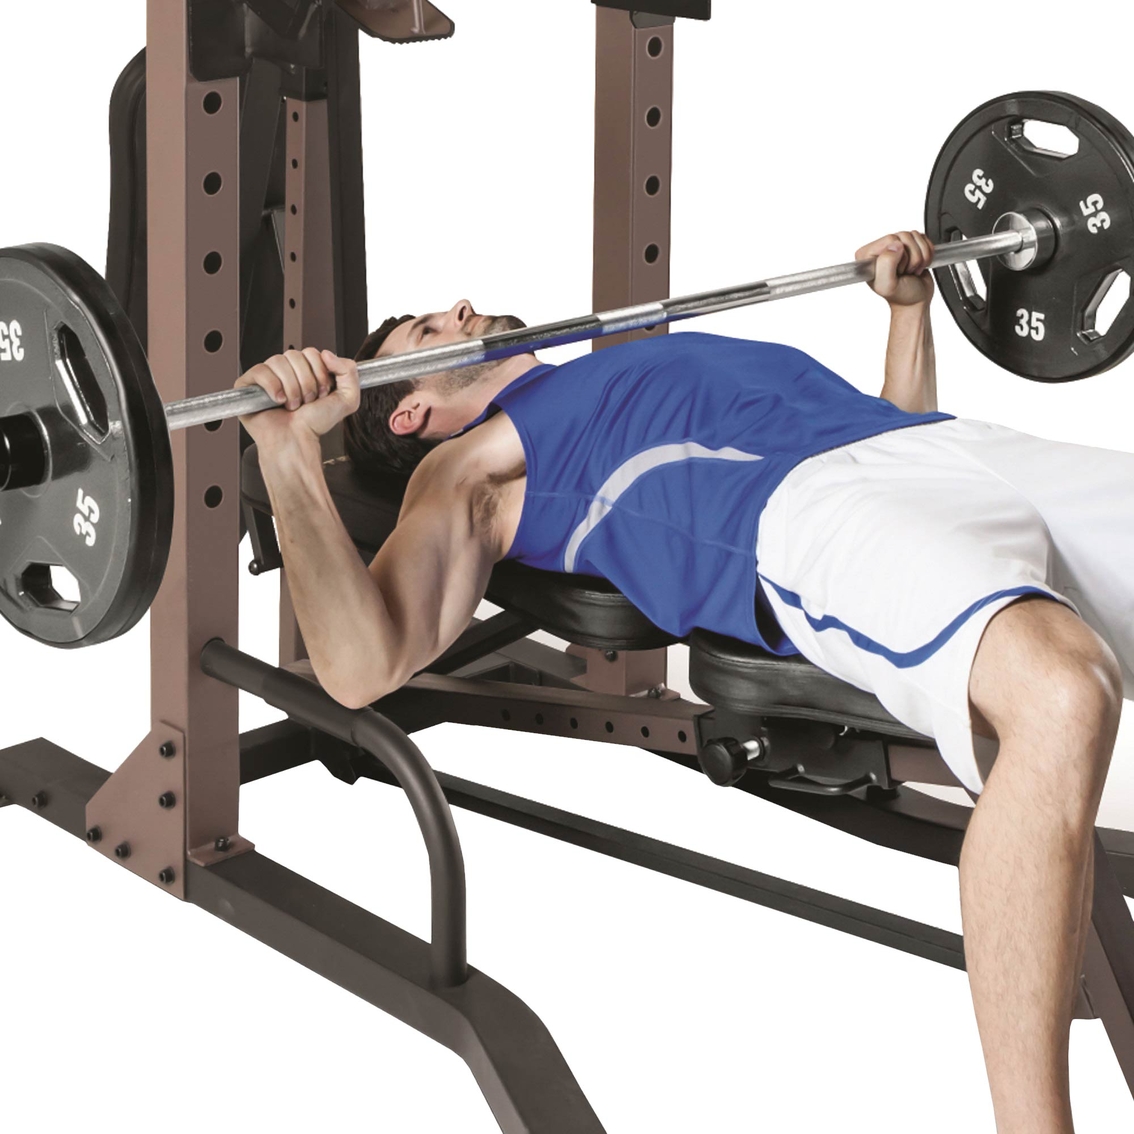 Steel Body Power Tower Plus Fold Up Bench - Image 2 of 4